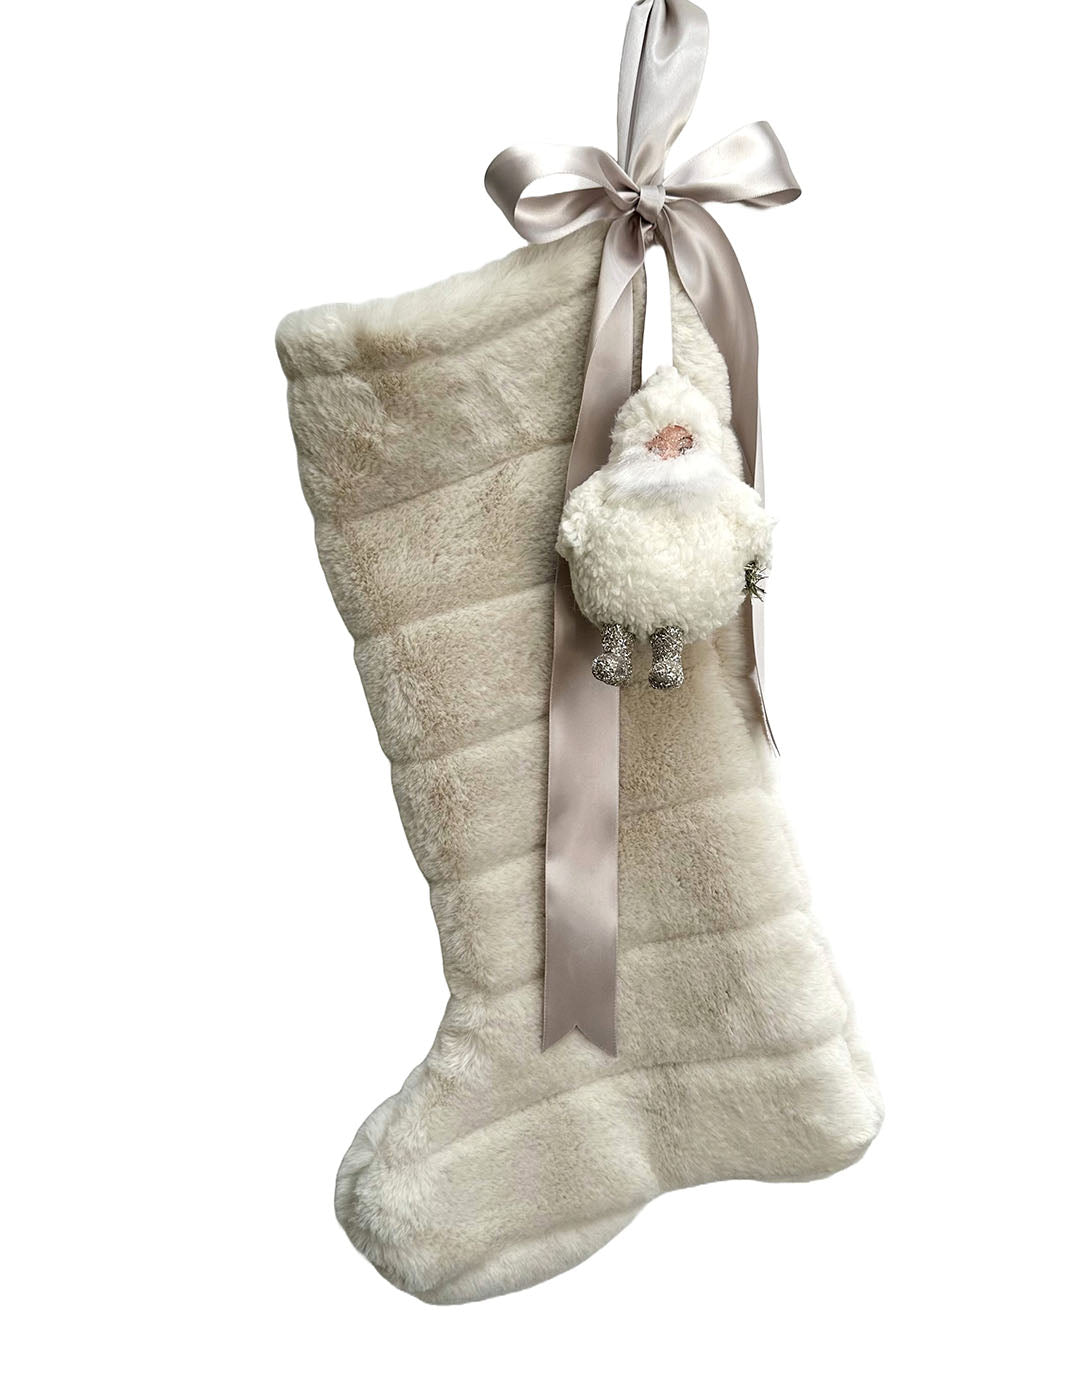 Grand Stocking with Santa - 20" Channeled Dove Fur